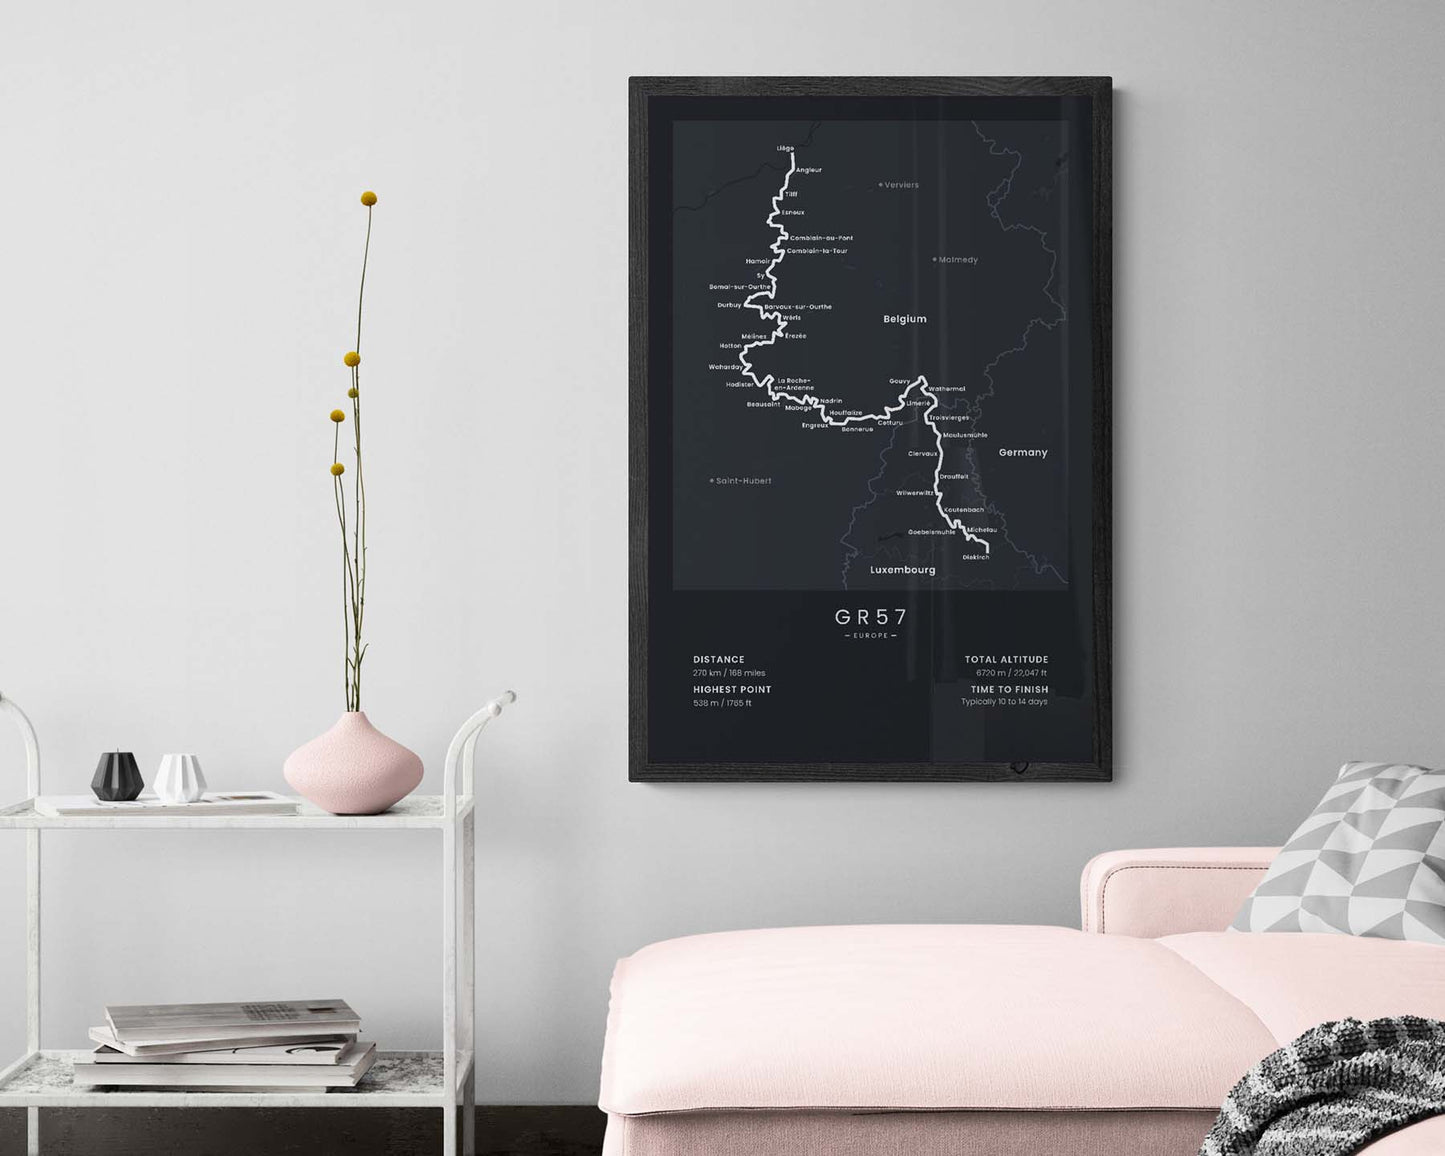 GR57 track print in minimal room decor (Luxembourg)